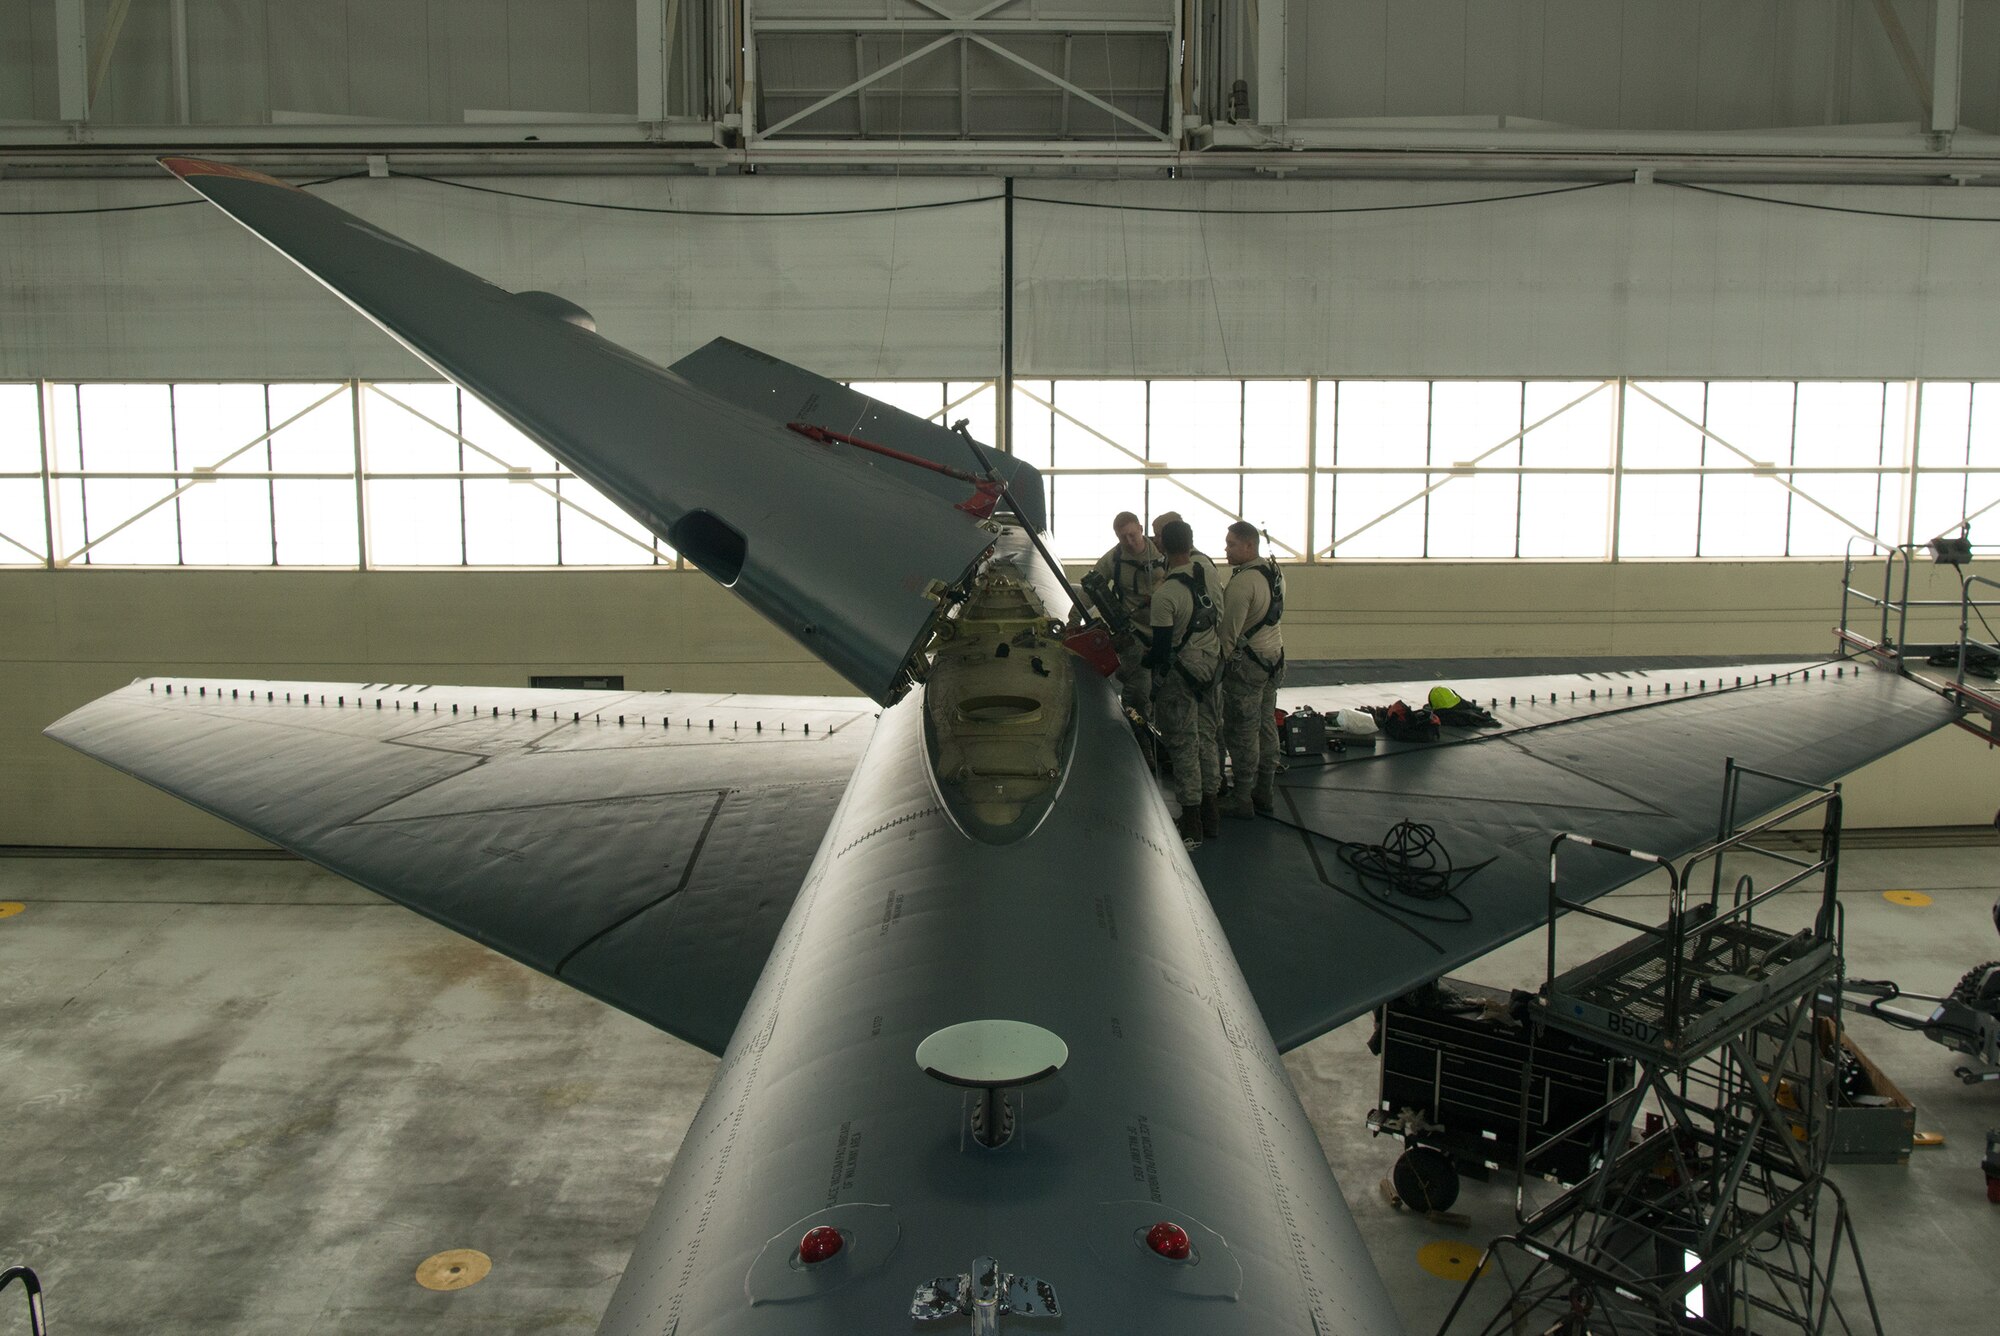 Crew chiefs assigned to the 5th Maintenance Squadron lower the vertical stabilizer on a B-52H Stratofortress at Minot Air Force Base, North Dakota, Feb. 10, 2019.